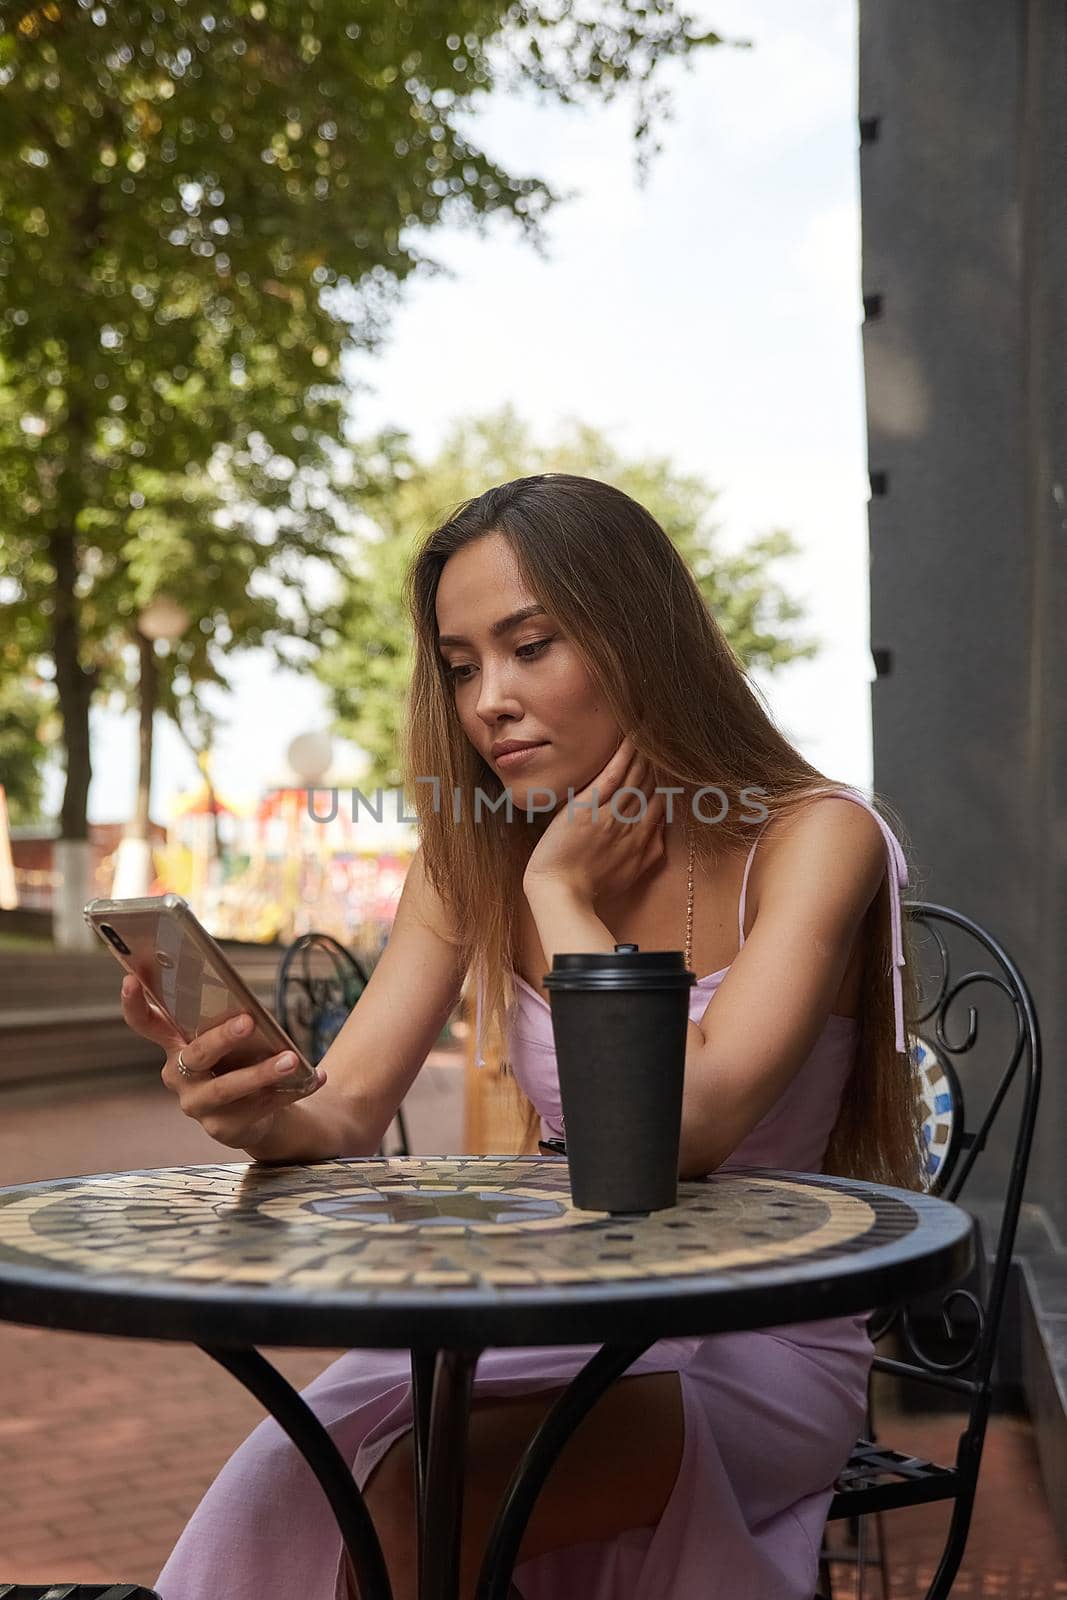 young well dressed woman sitting at table with drink, using her smartphone. lady having cup of coffee outside of cafe, surfing internet on cell phone, chatting online. modern communication technology